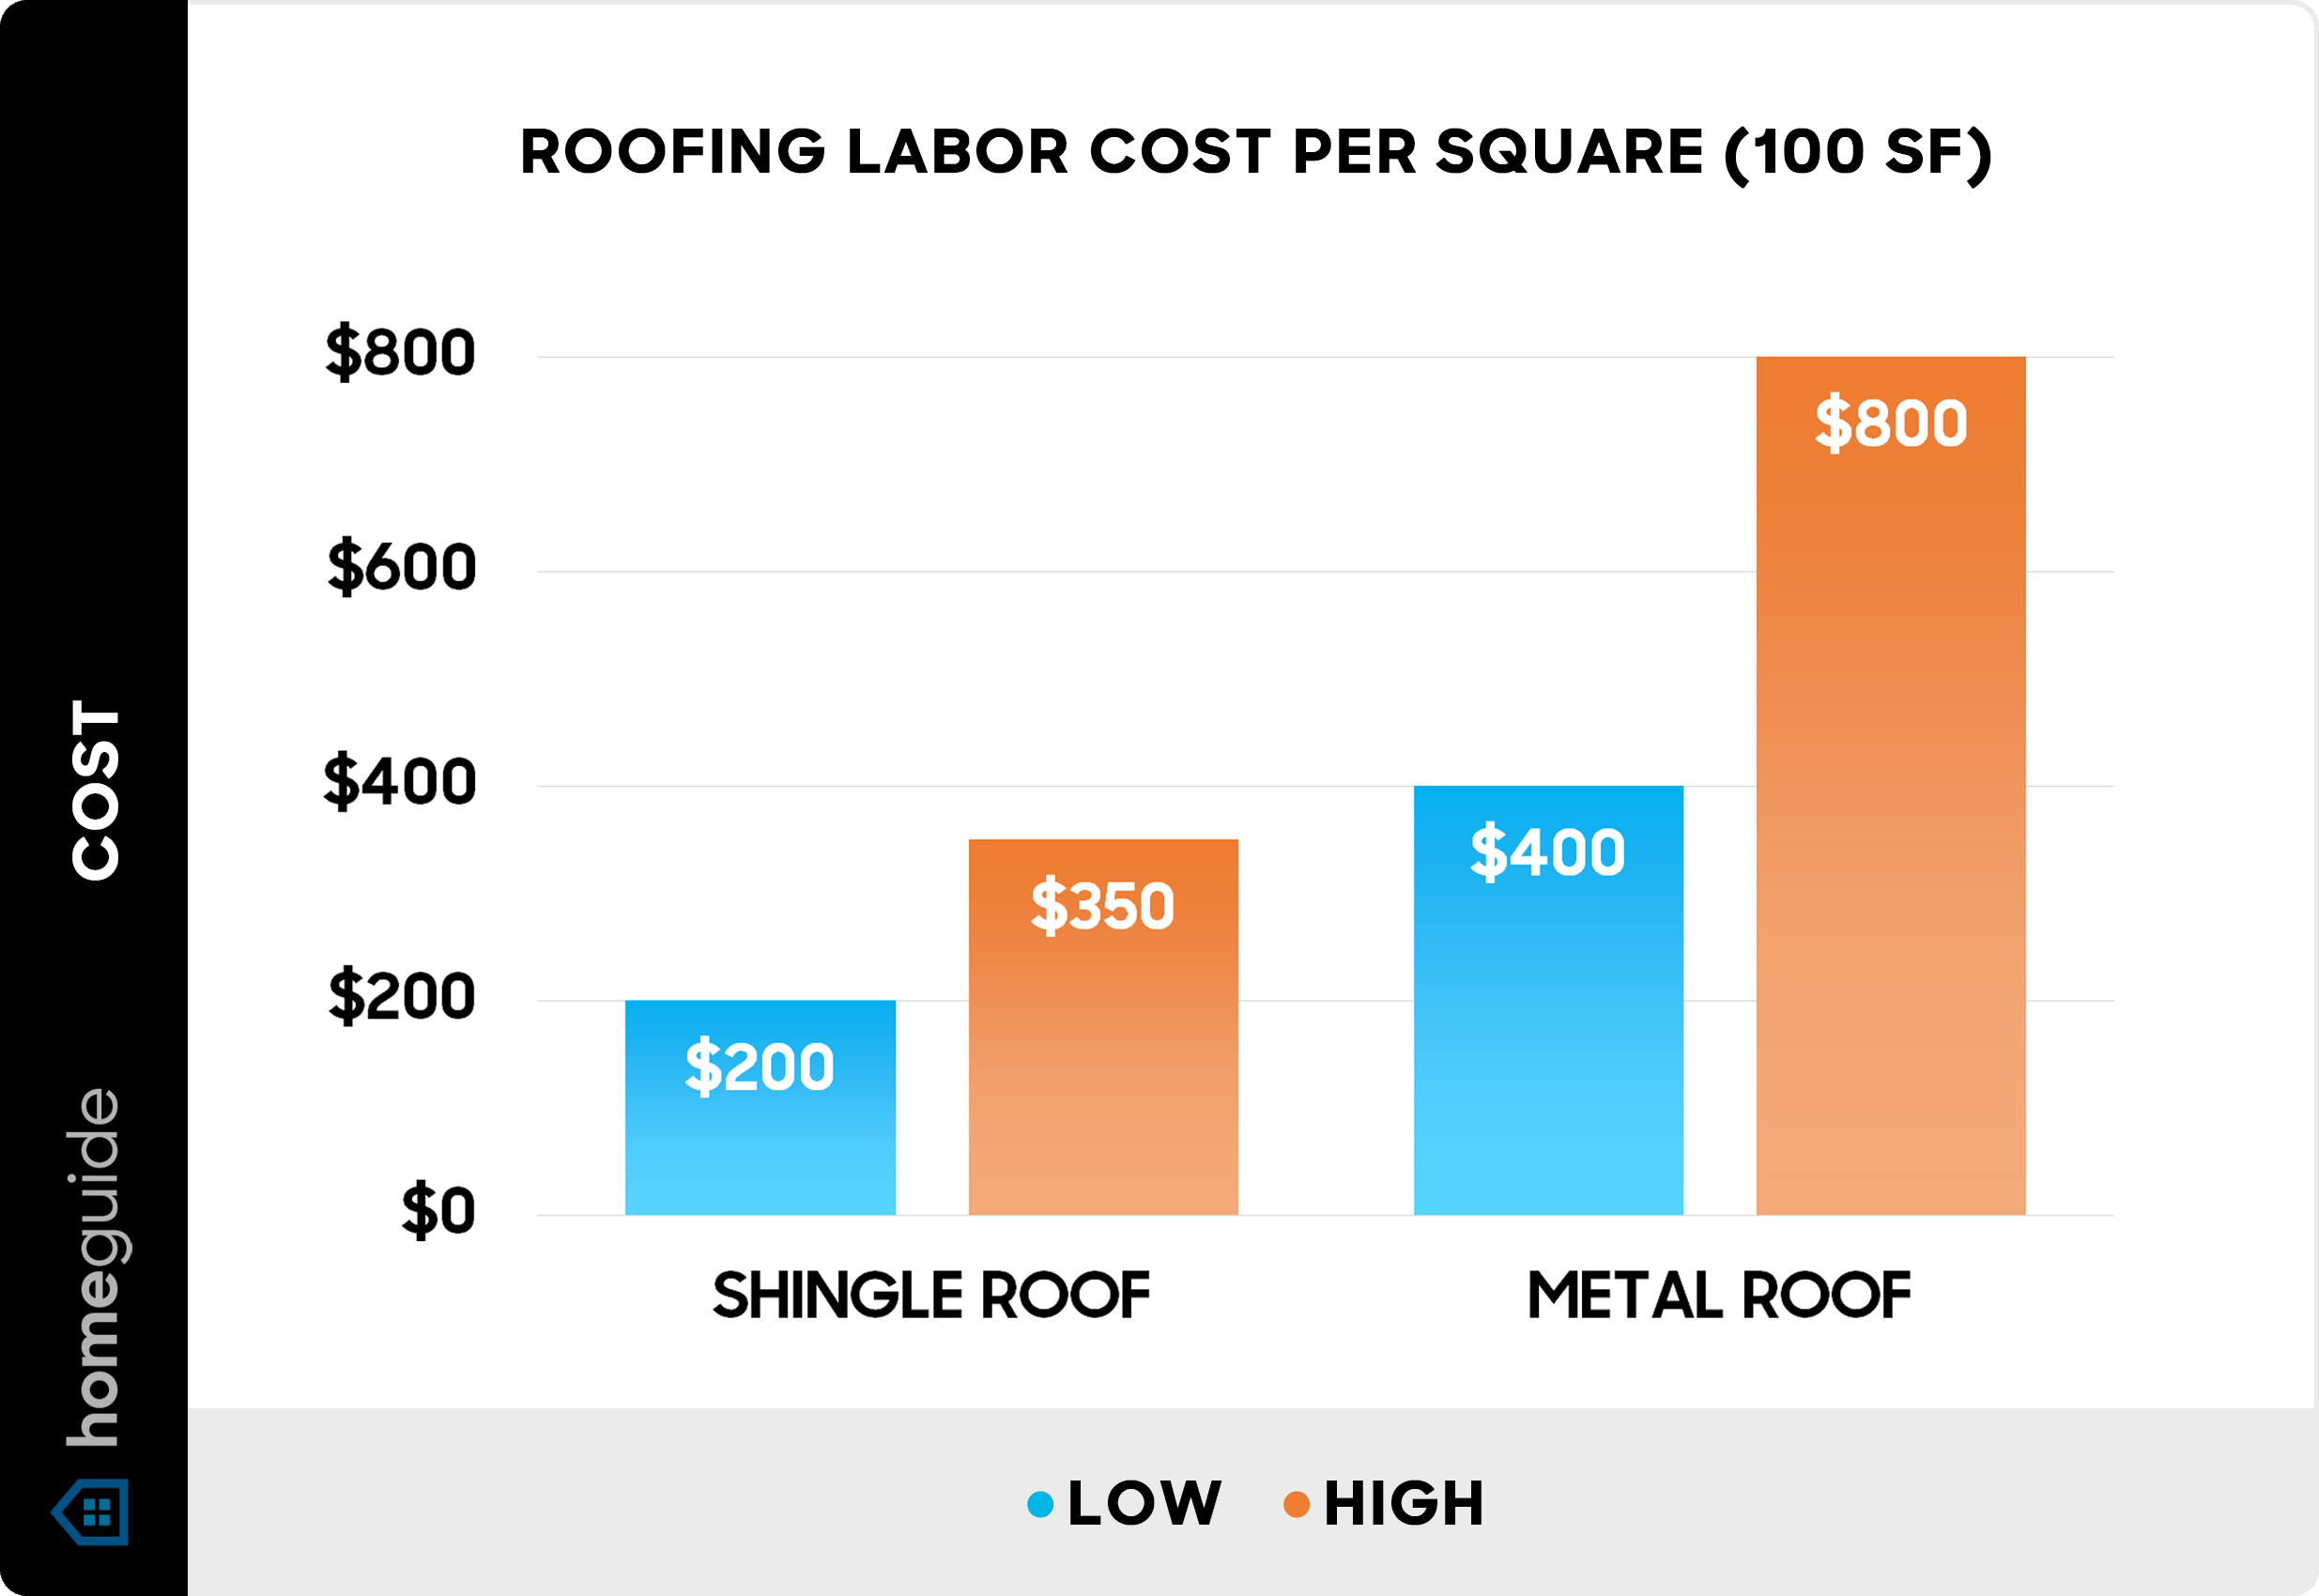 How much does a roof cost per square foot?